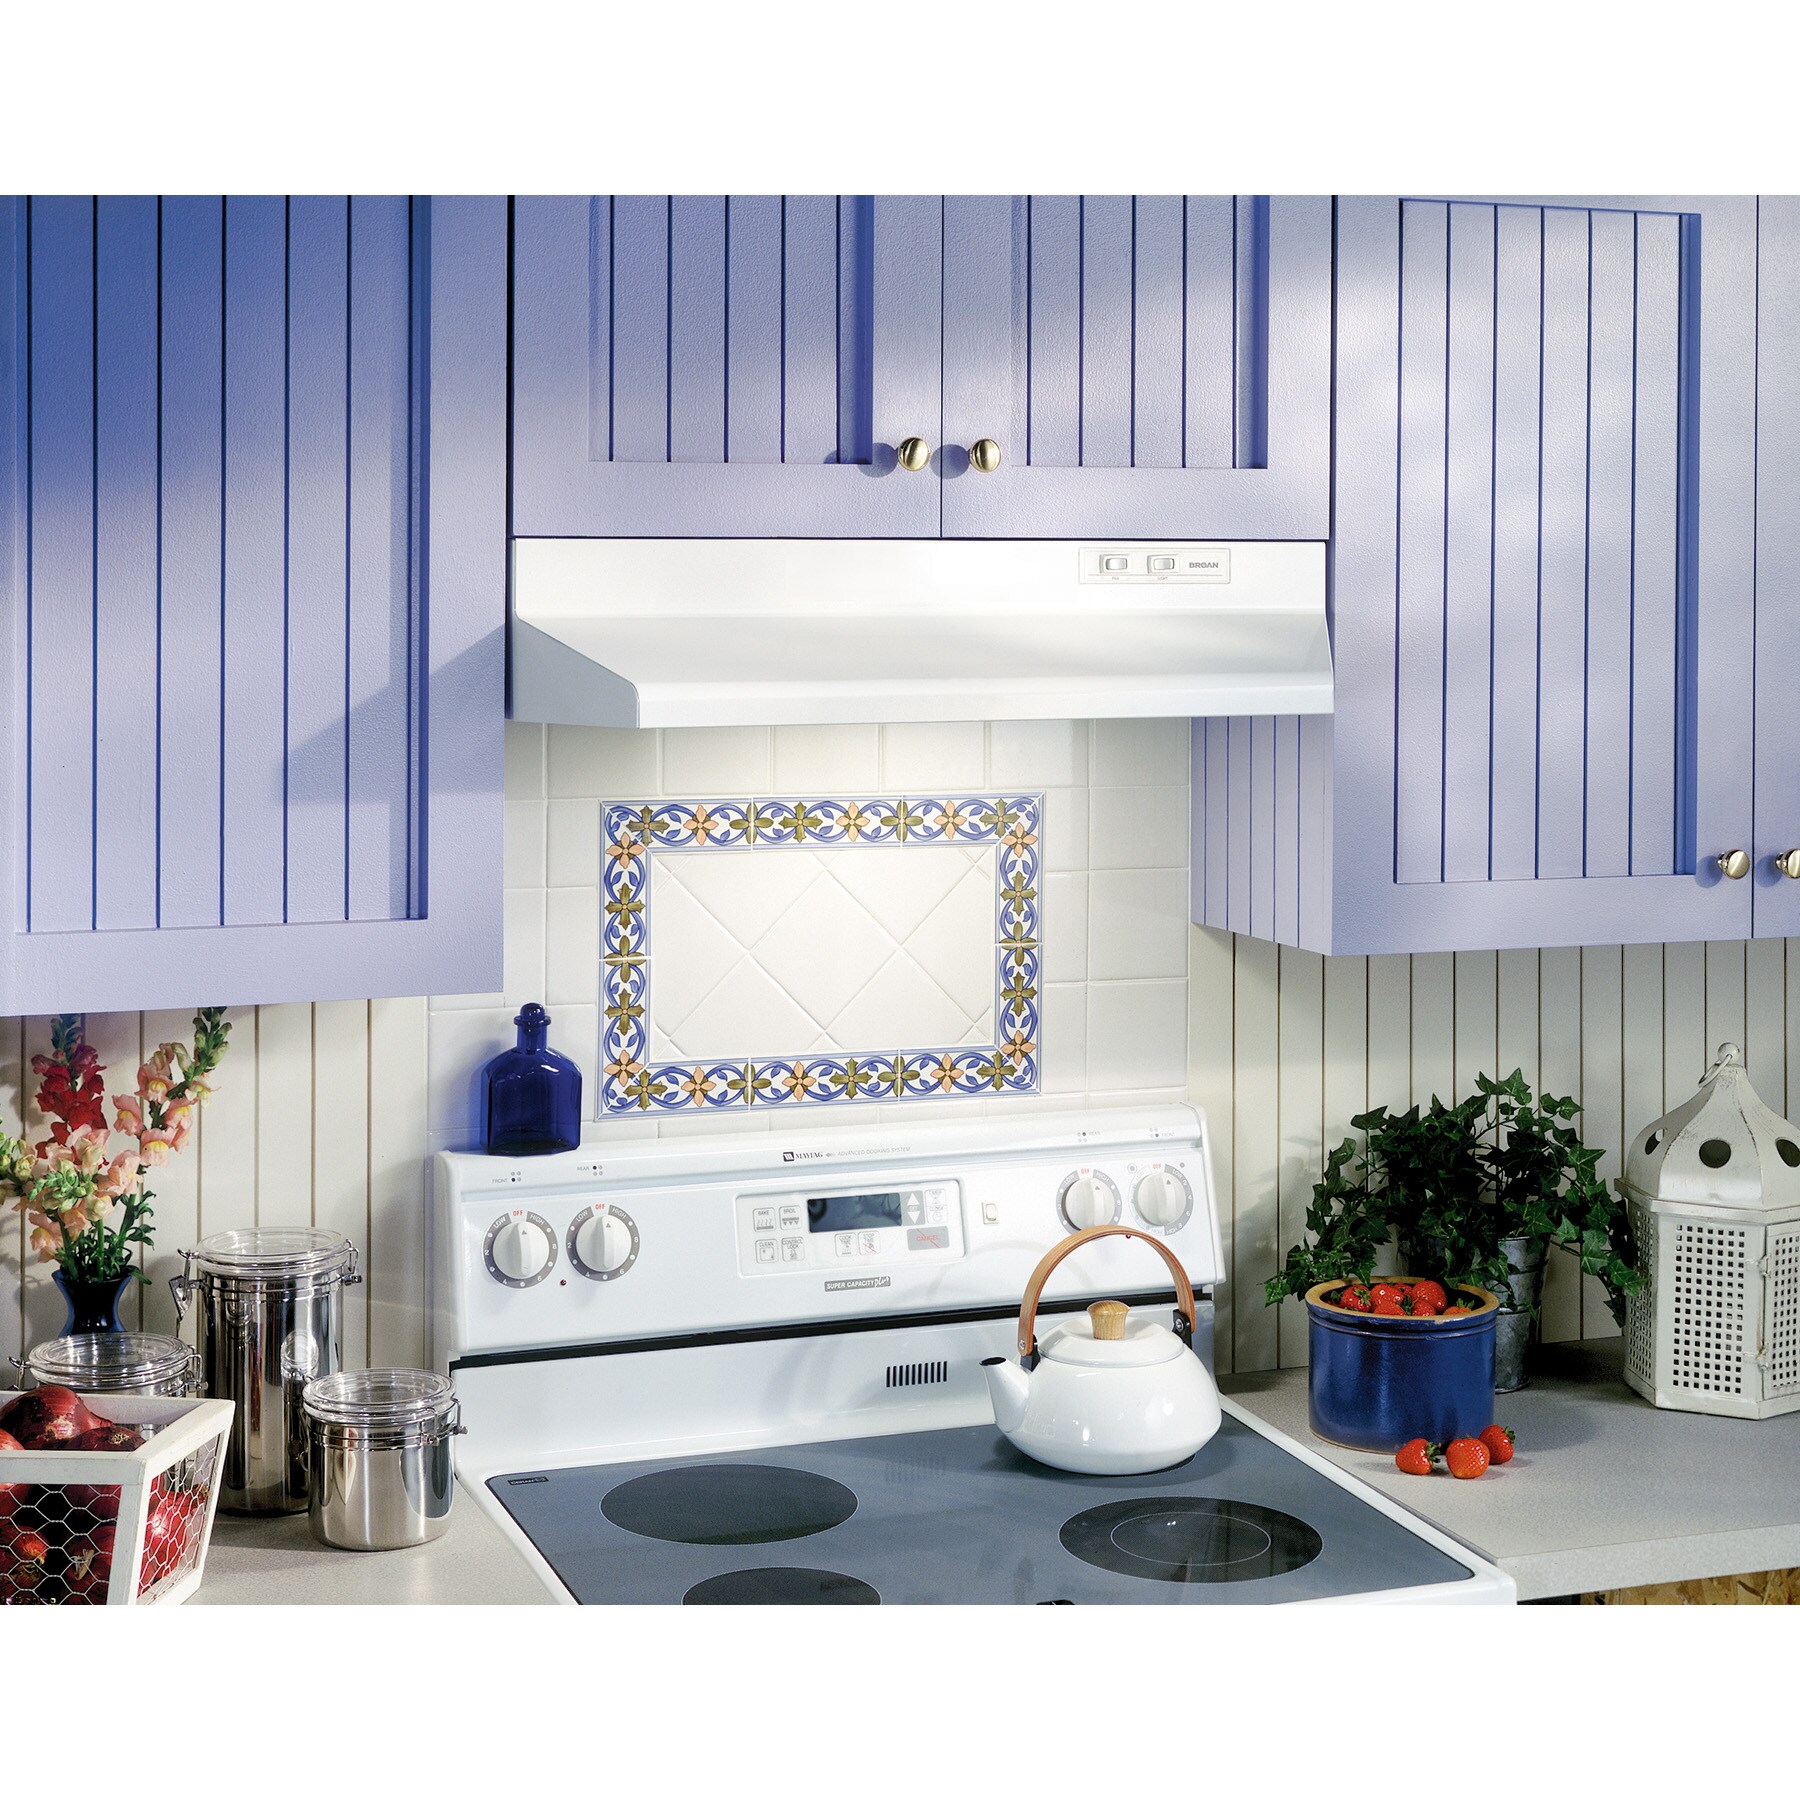 30-inch White Broan-NuTone 463001 Under-Cabinet Range Hood with Infinitely Adjustable Speed Control 